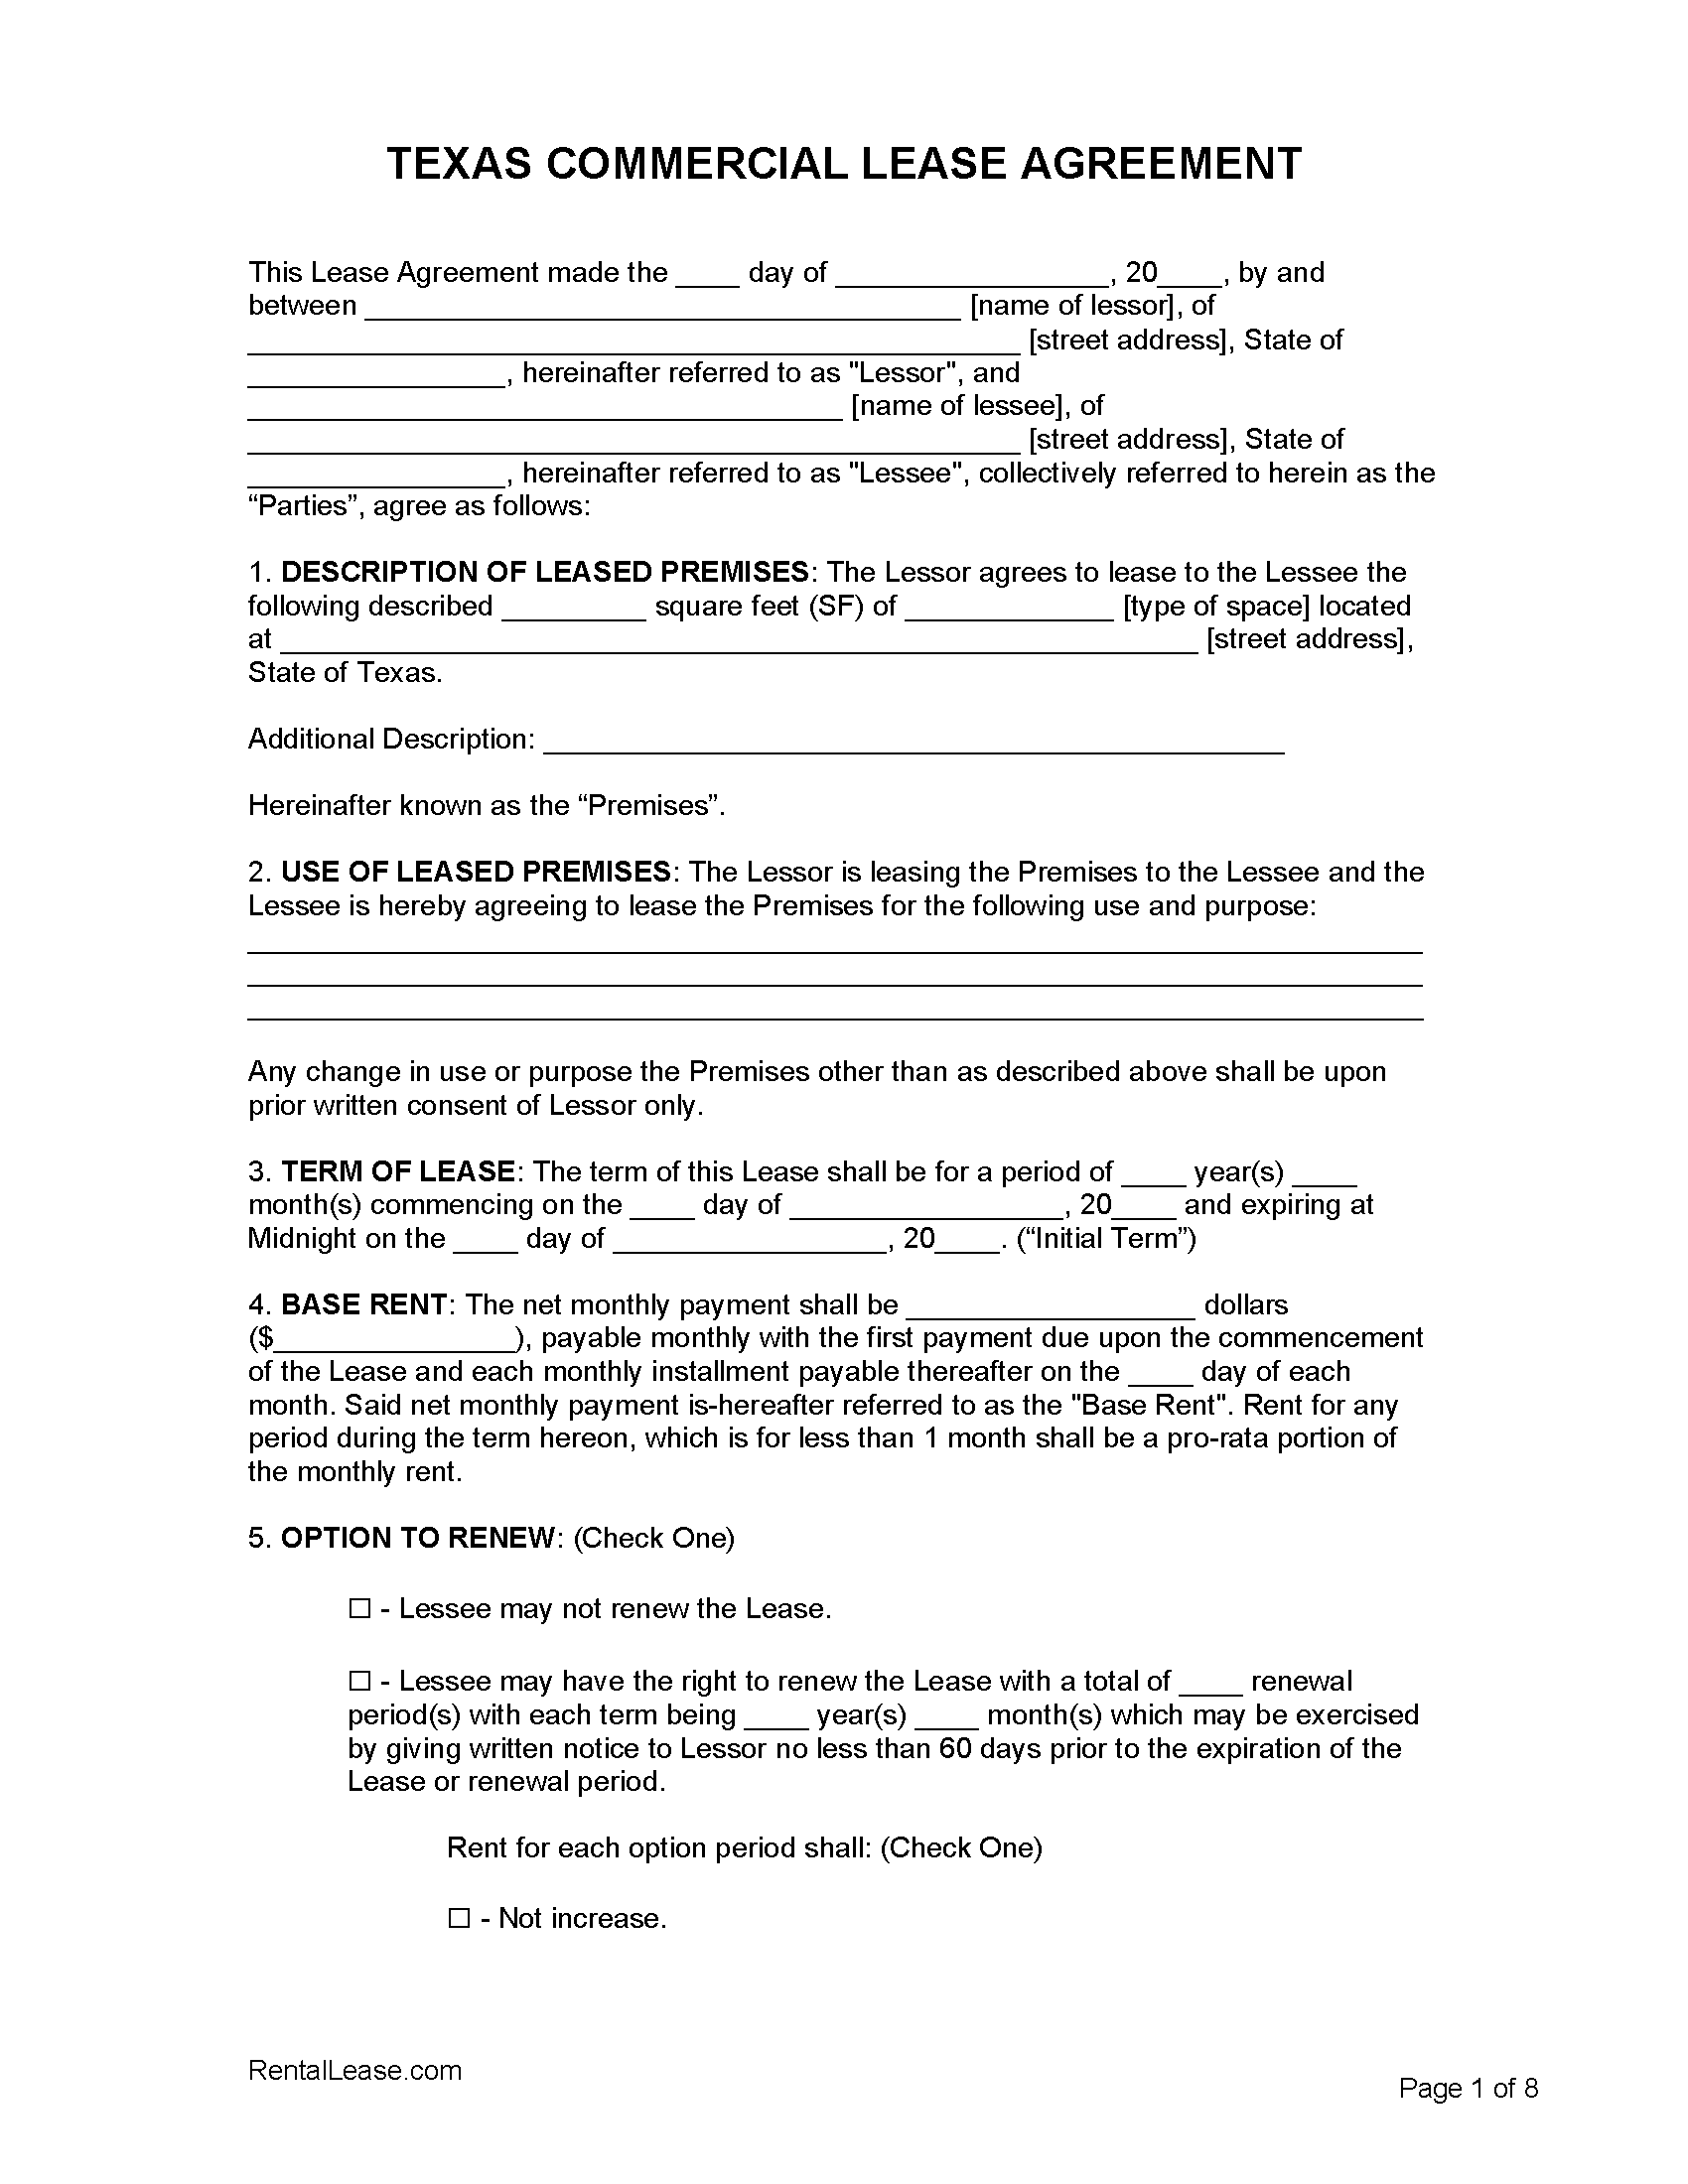 Free Texas Commercial Lease Agreement Template  PDF  Word For commercial lease agreement template word